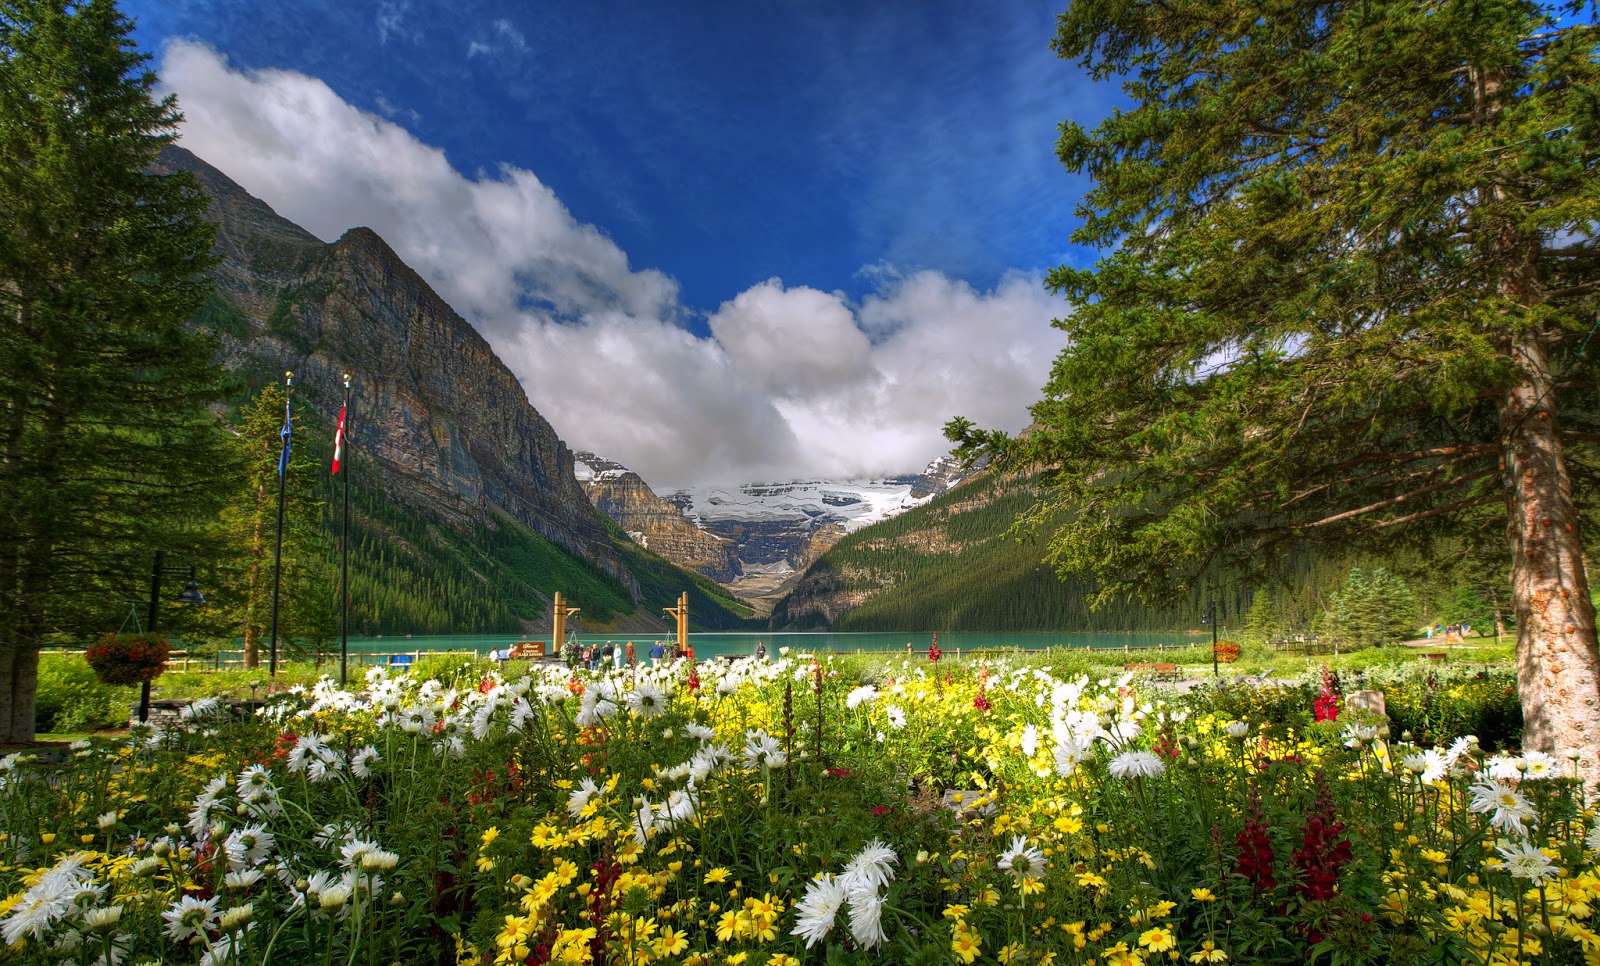 Flowers Name In Banff National Park - HD Wallpaper 